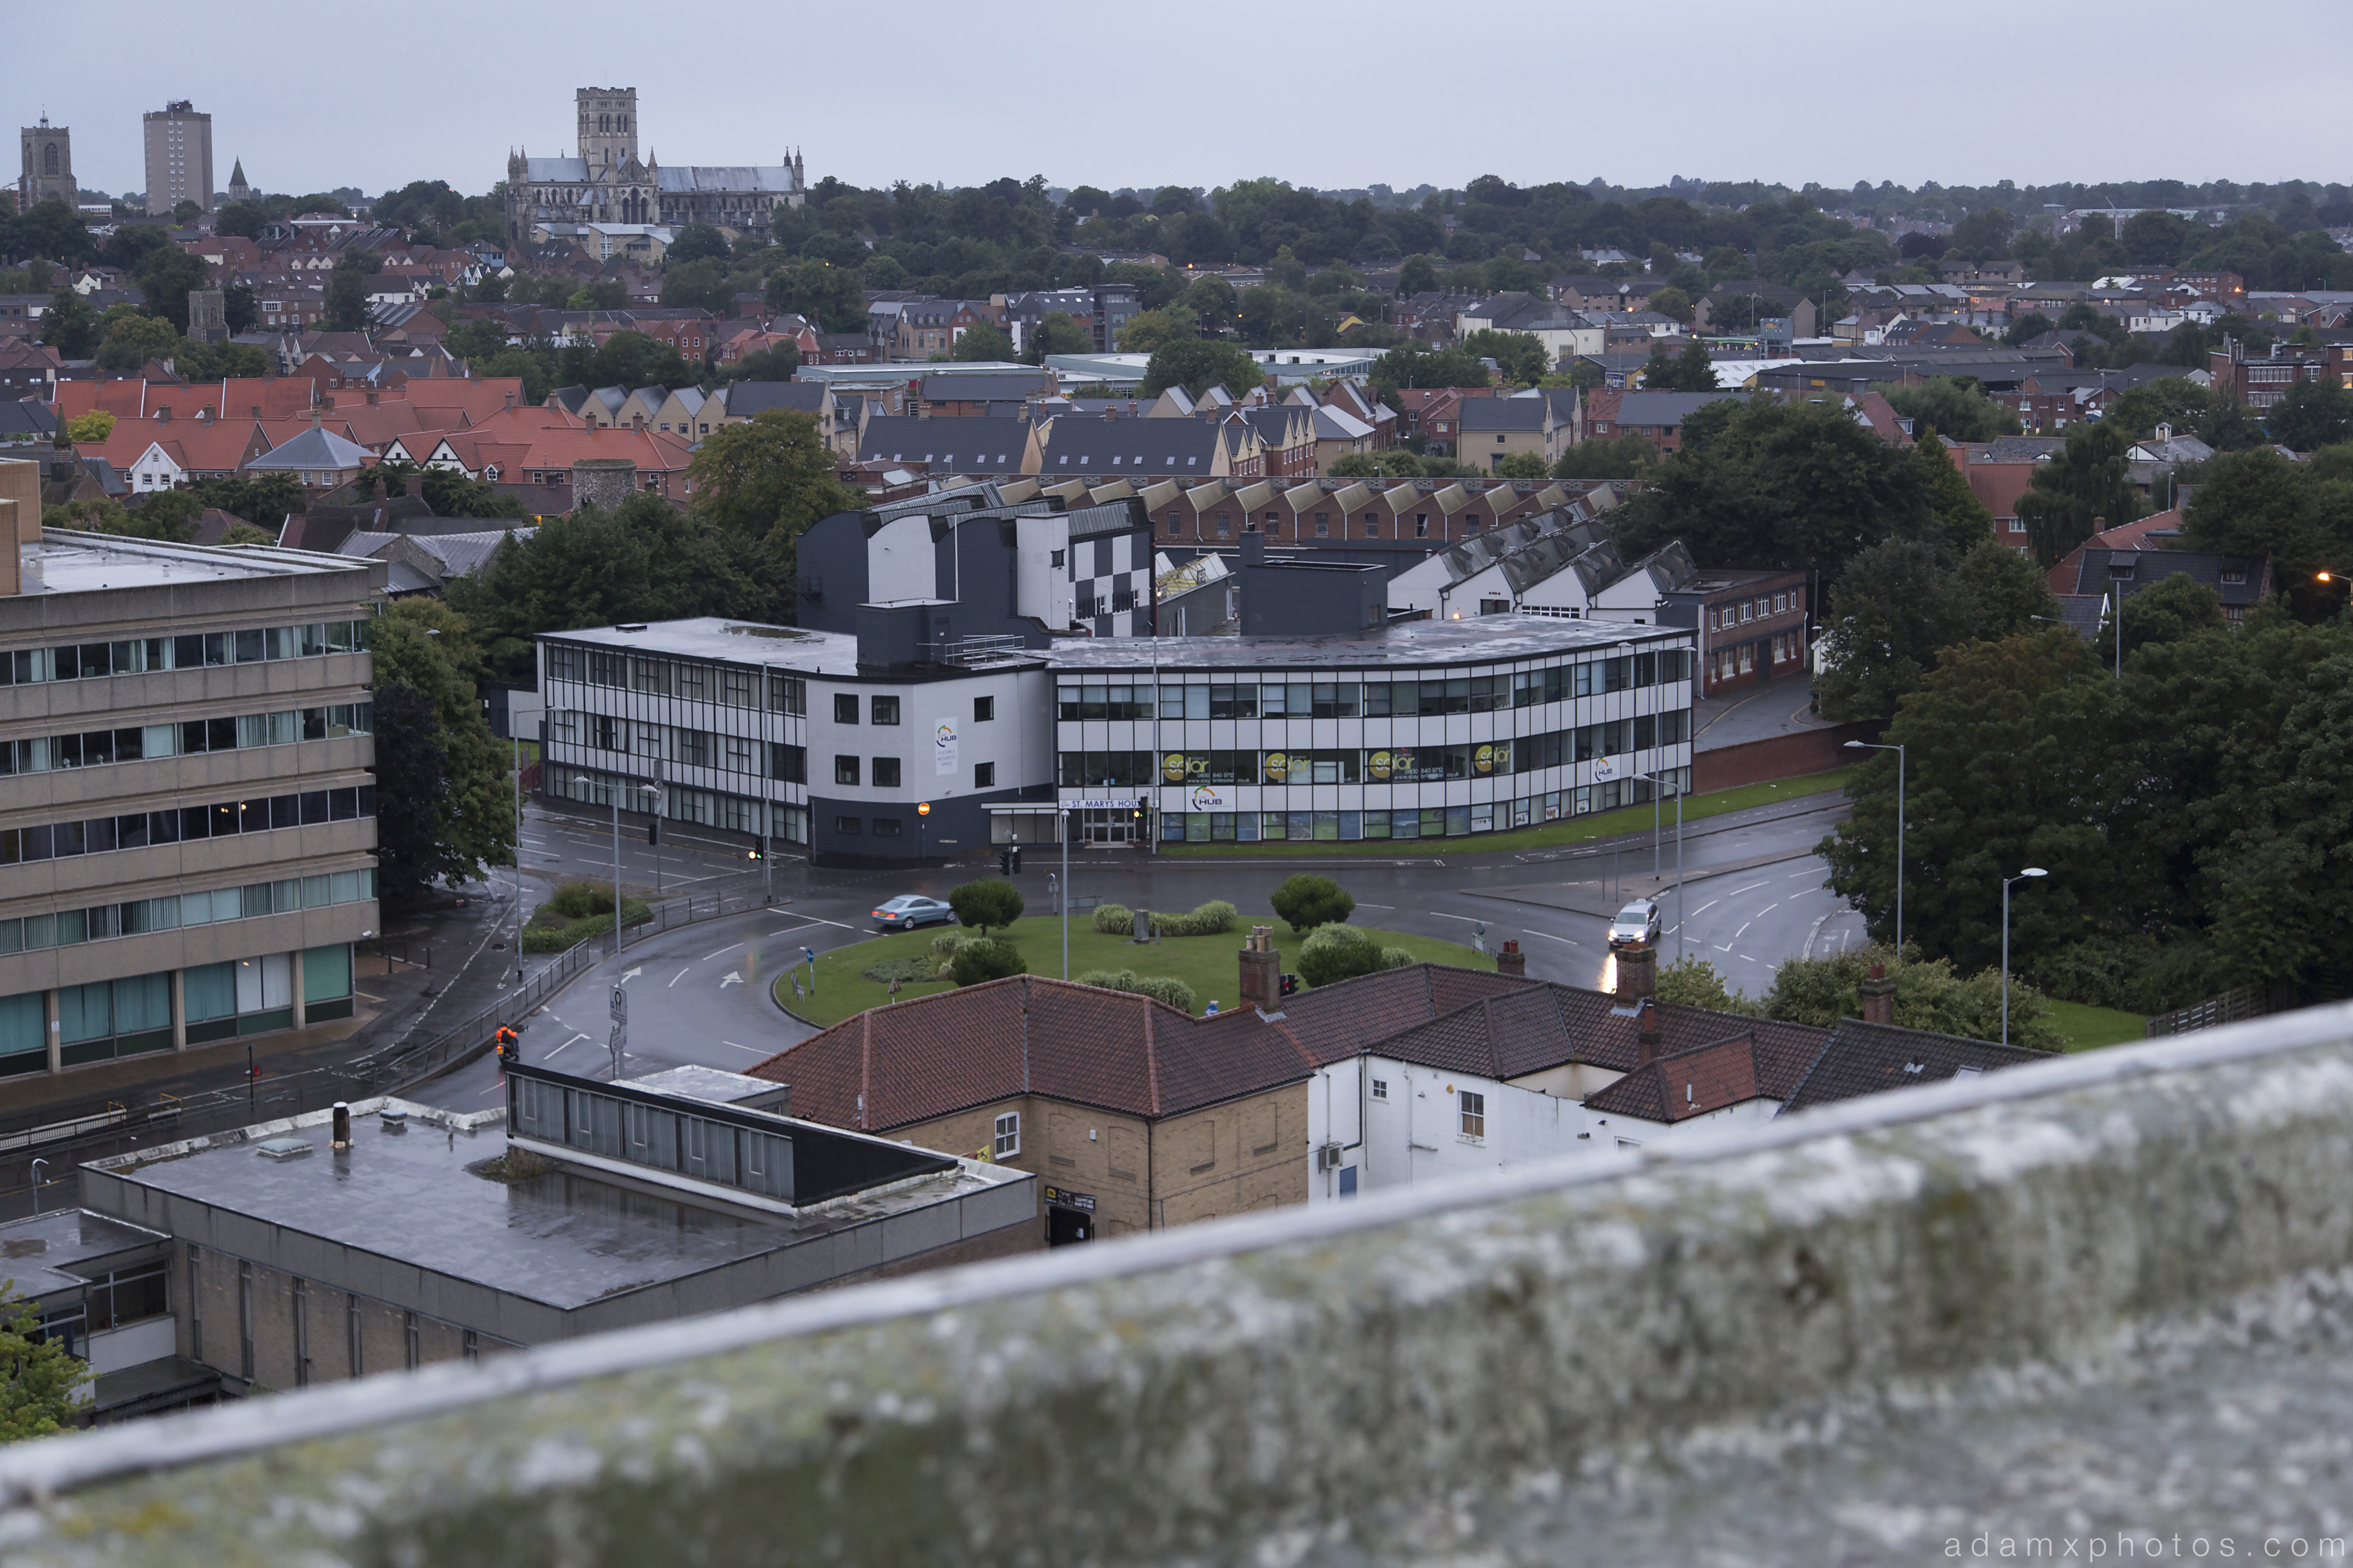 Roof rooftopping Sovereign House HMSO Norwich Urbex Adam X Urban Exploration 2015 Abandoned decay lost forgotten derelict